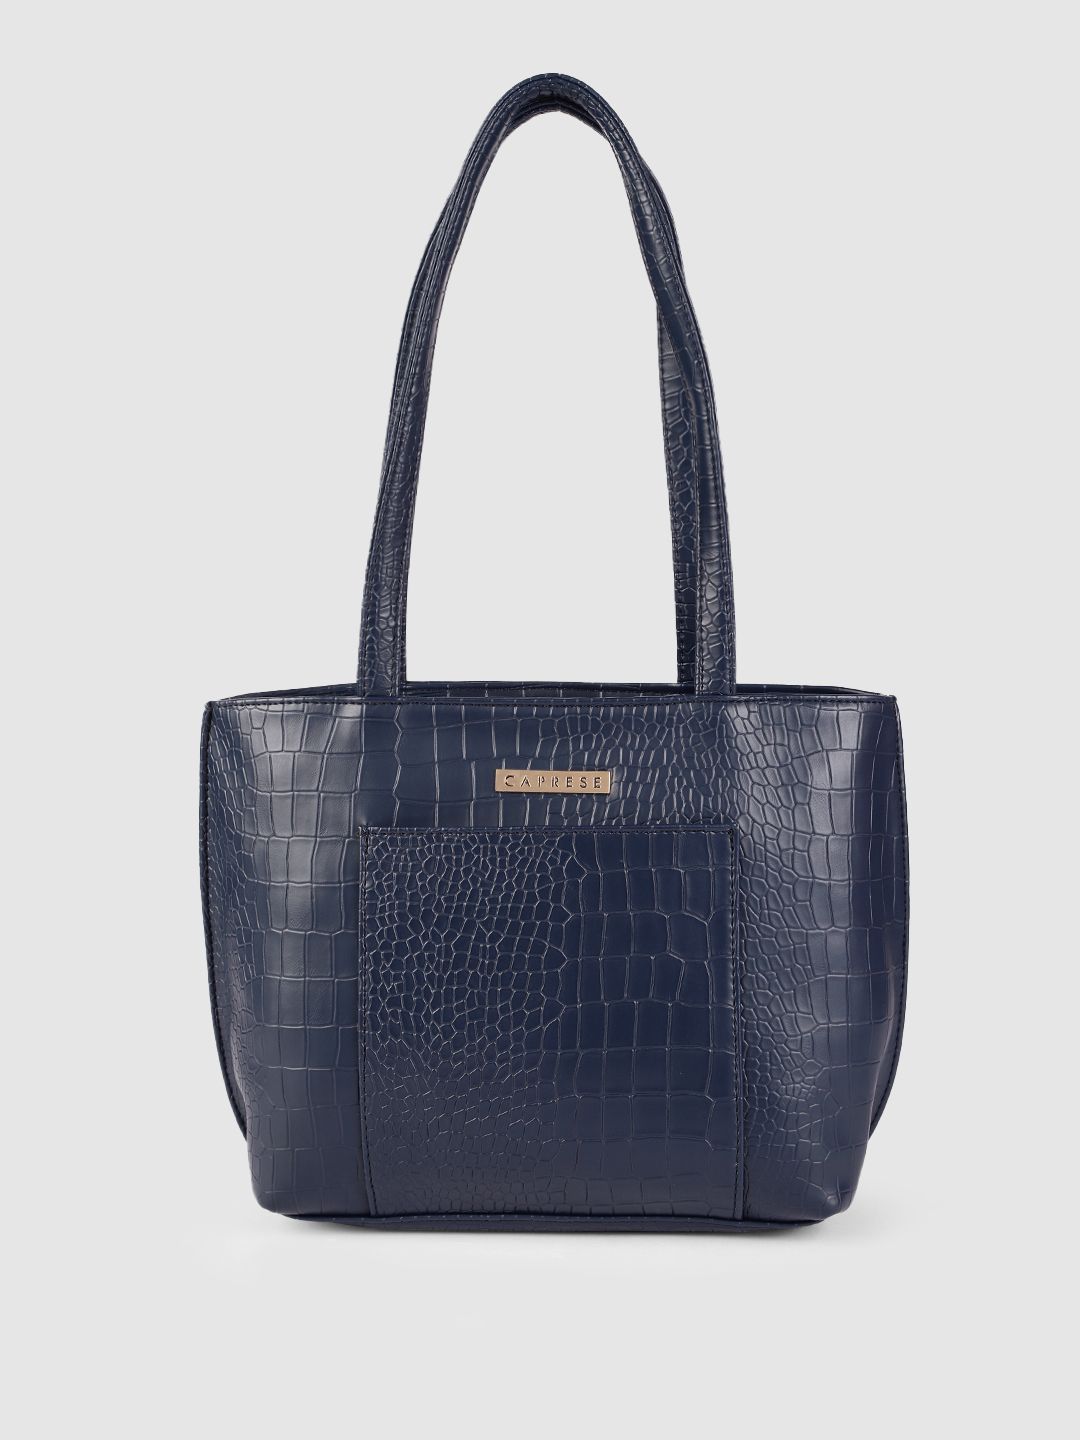 Caprese Women Navy Blue Textured Leather Shoulder Bag Price in India